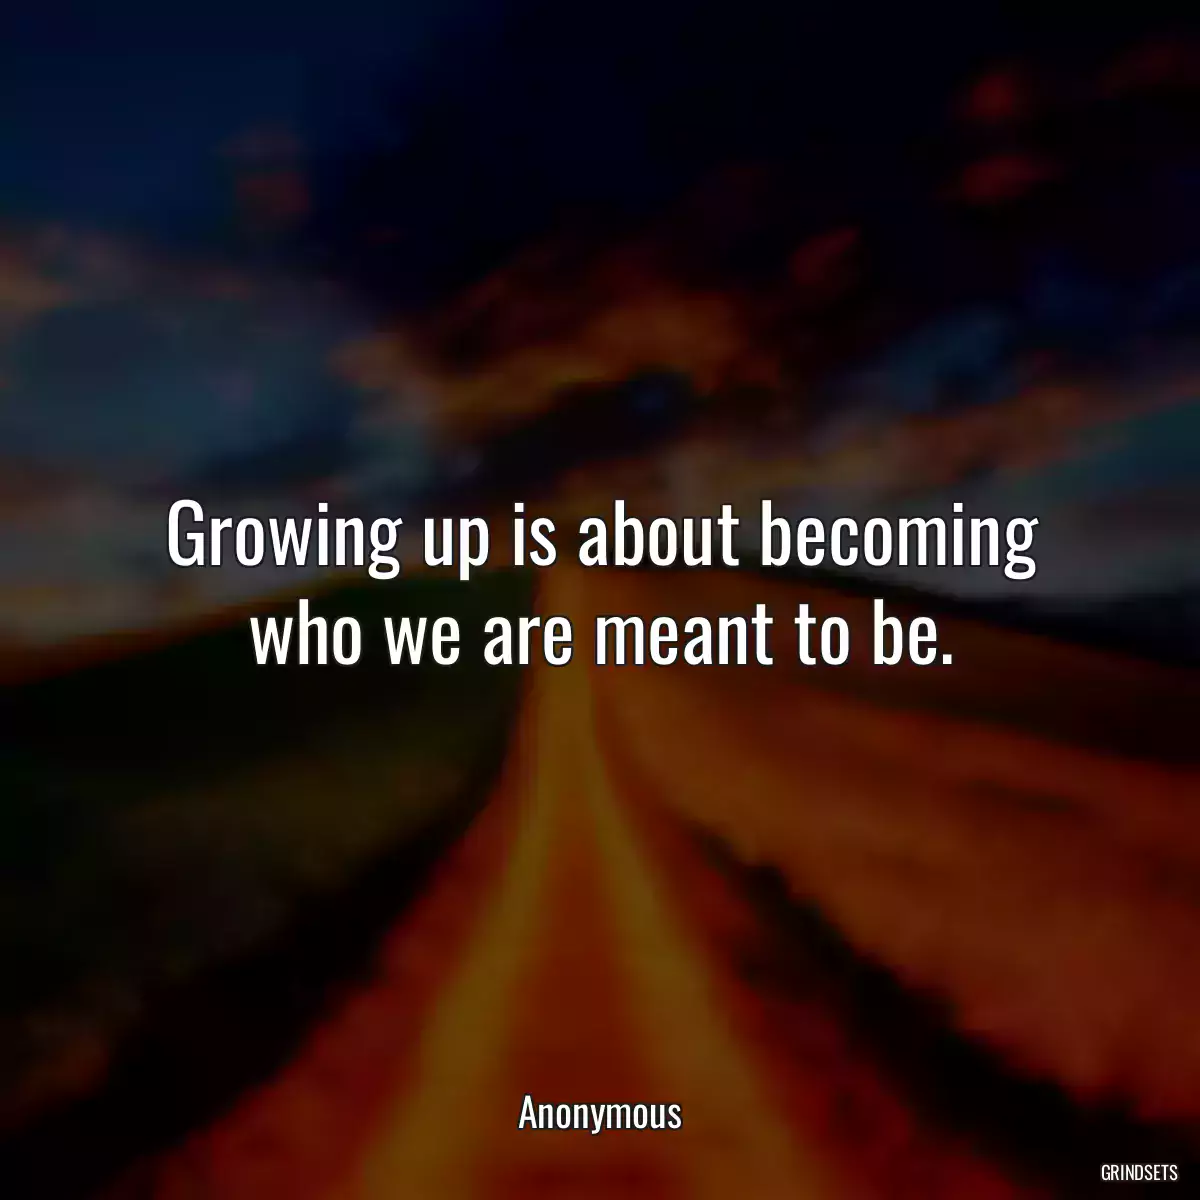 Growing up is about becoming who we are meant to be.